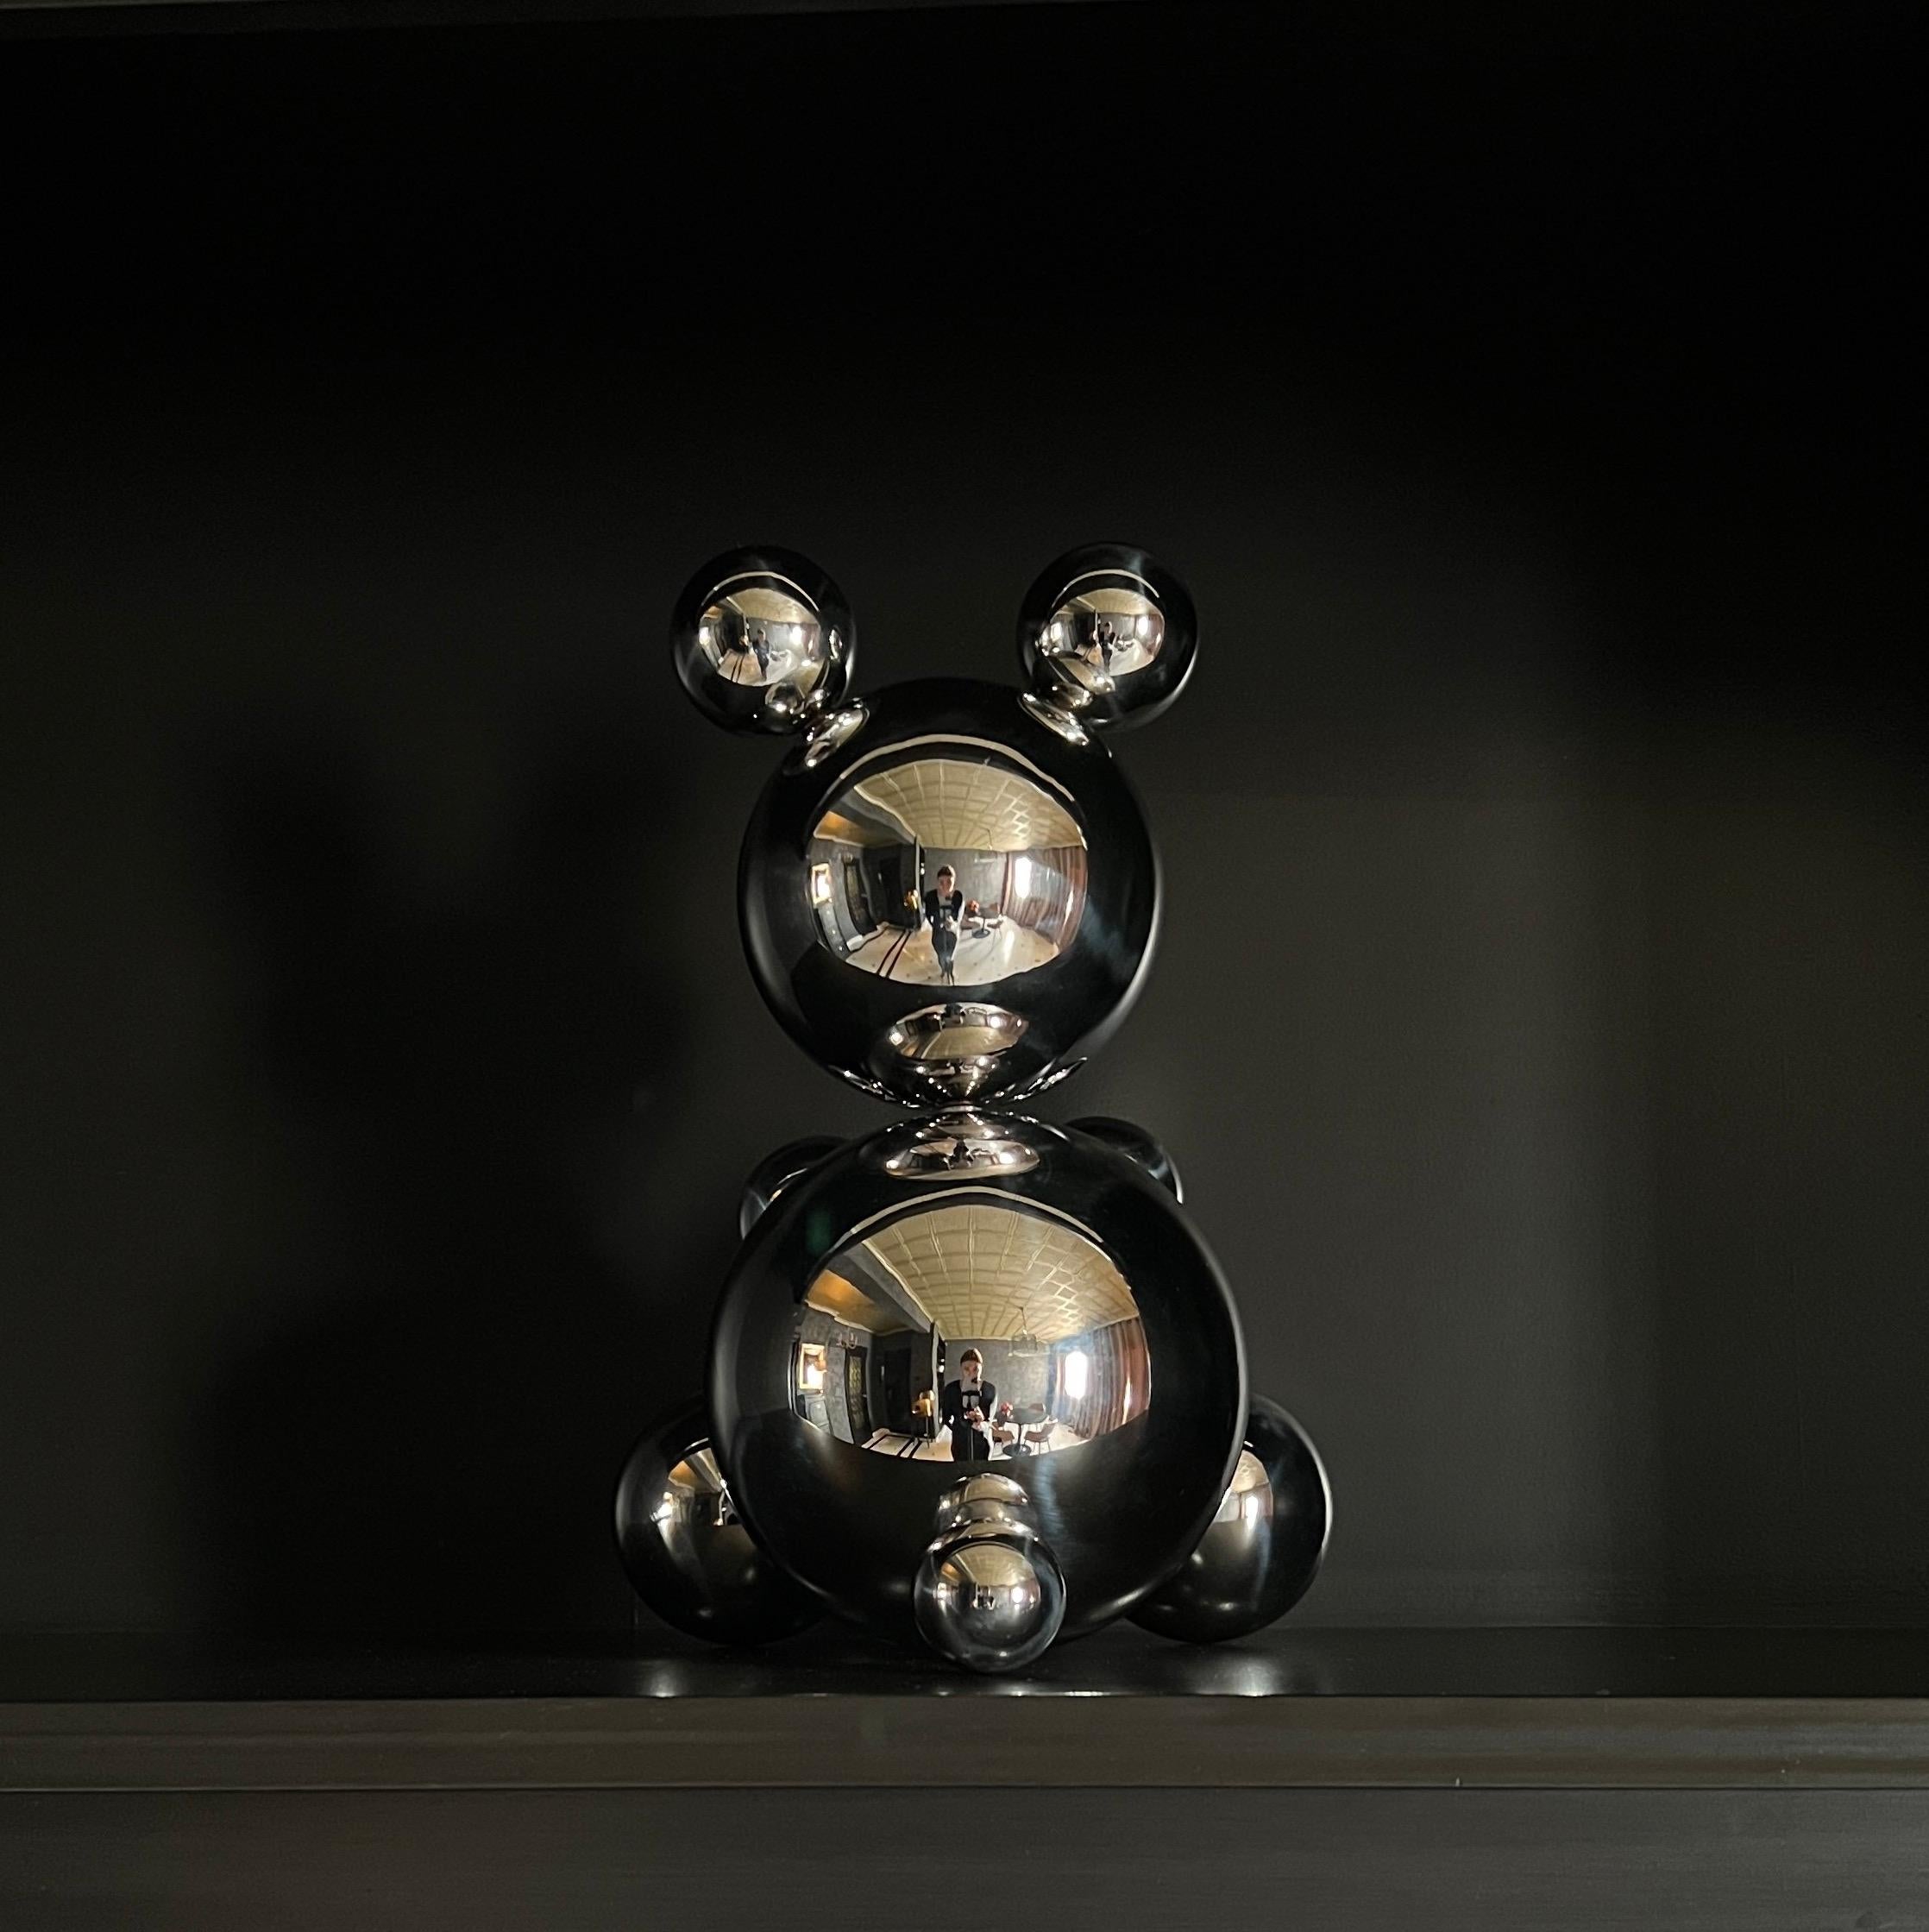 Middle Stainless Steel Bear 'Lucas' Sculpture Minimalistic Animal 2